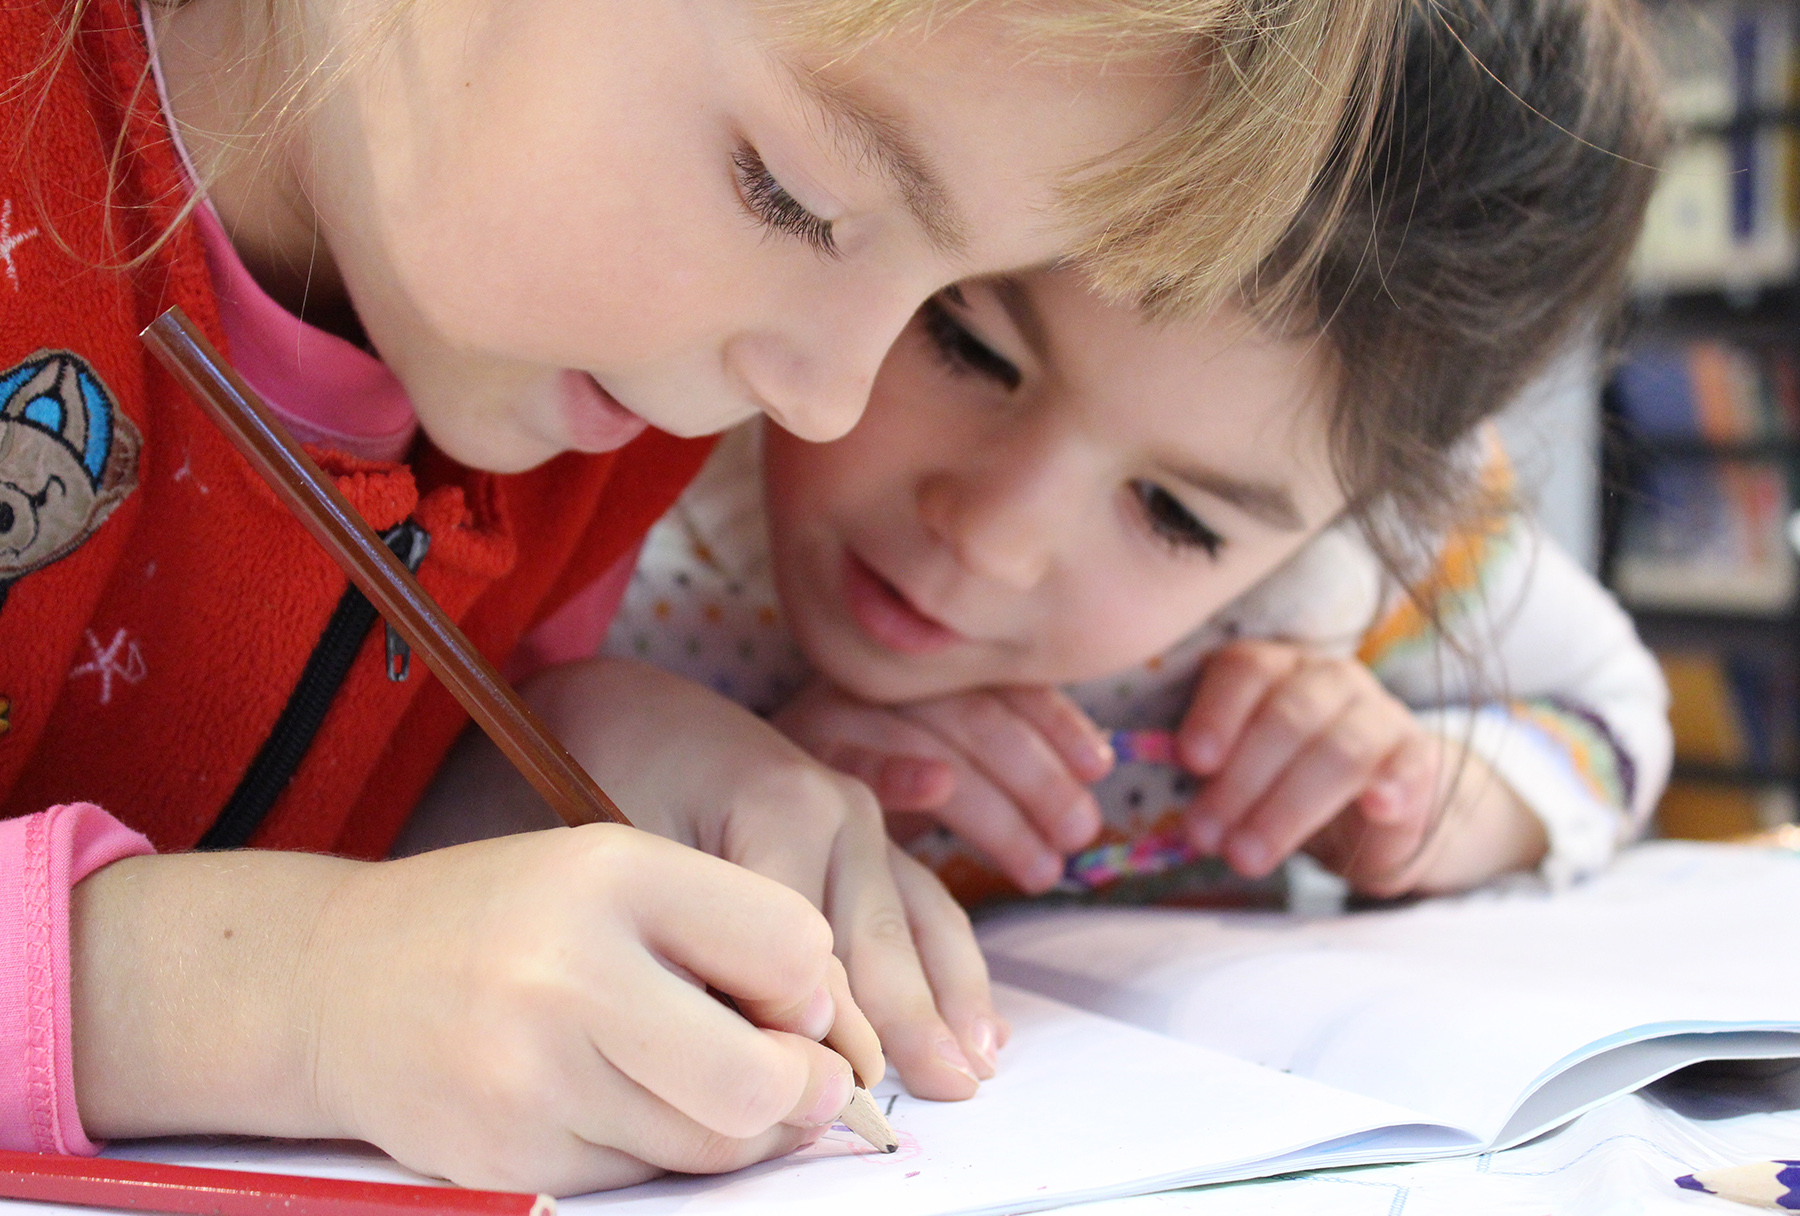 Two children looking at writing on a piece of paper